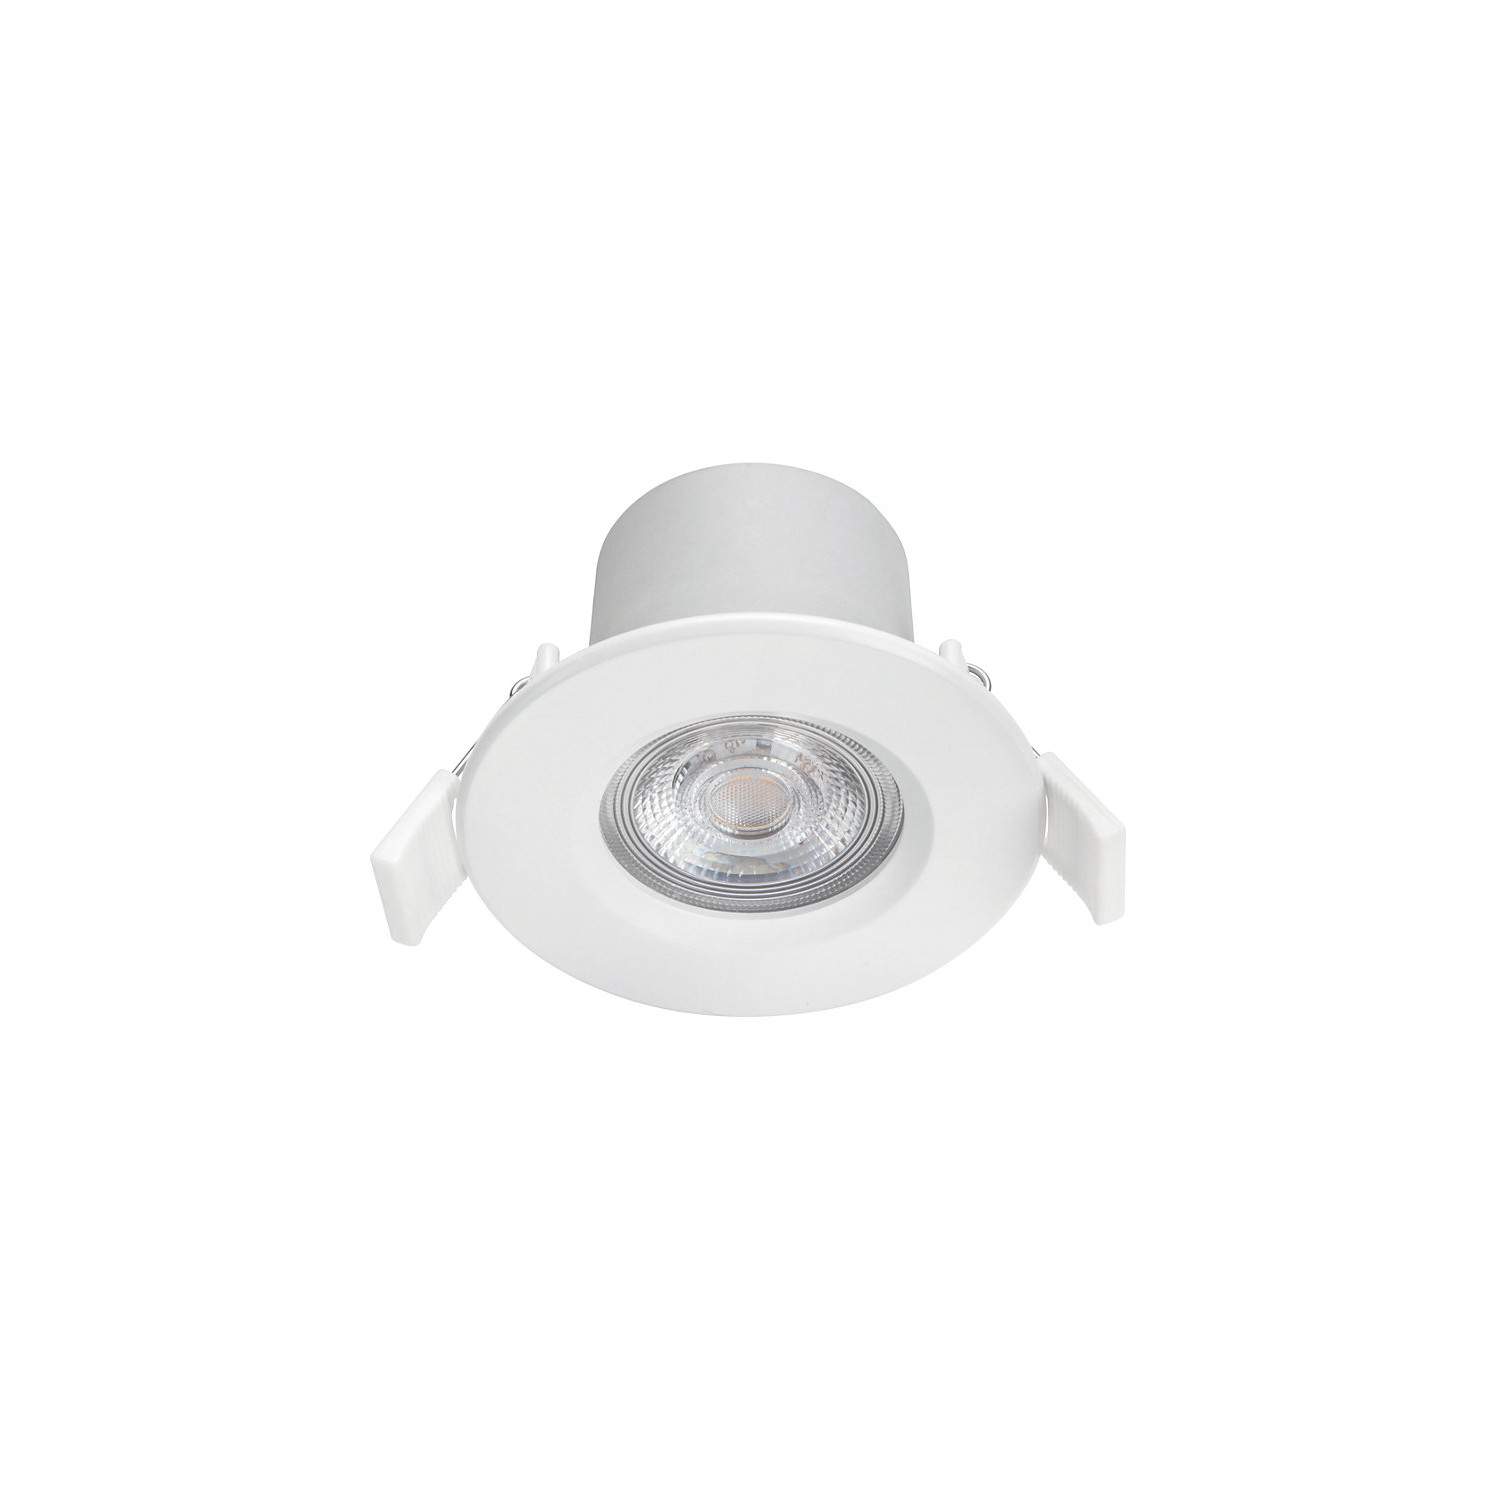 Pack of 3 5W LED Downlights Ø70mm - Ledkia